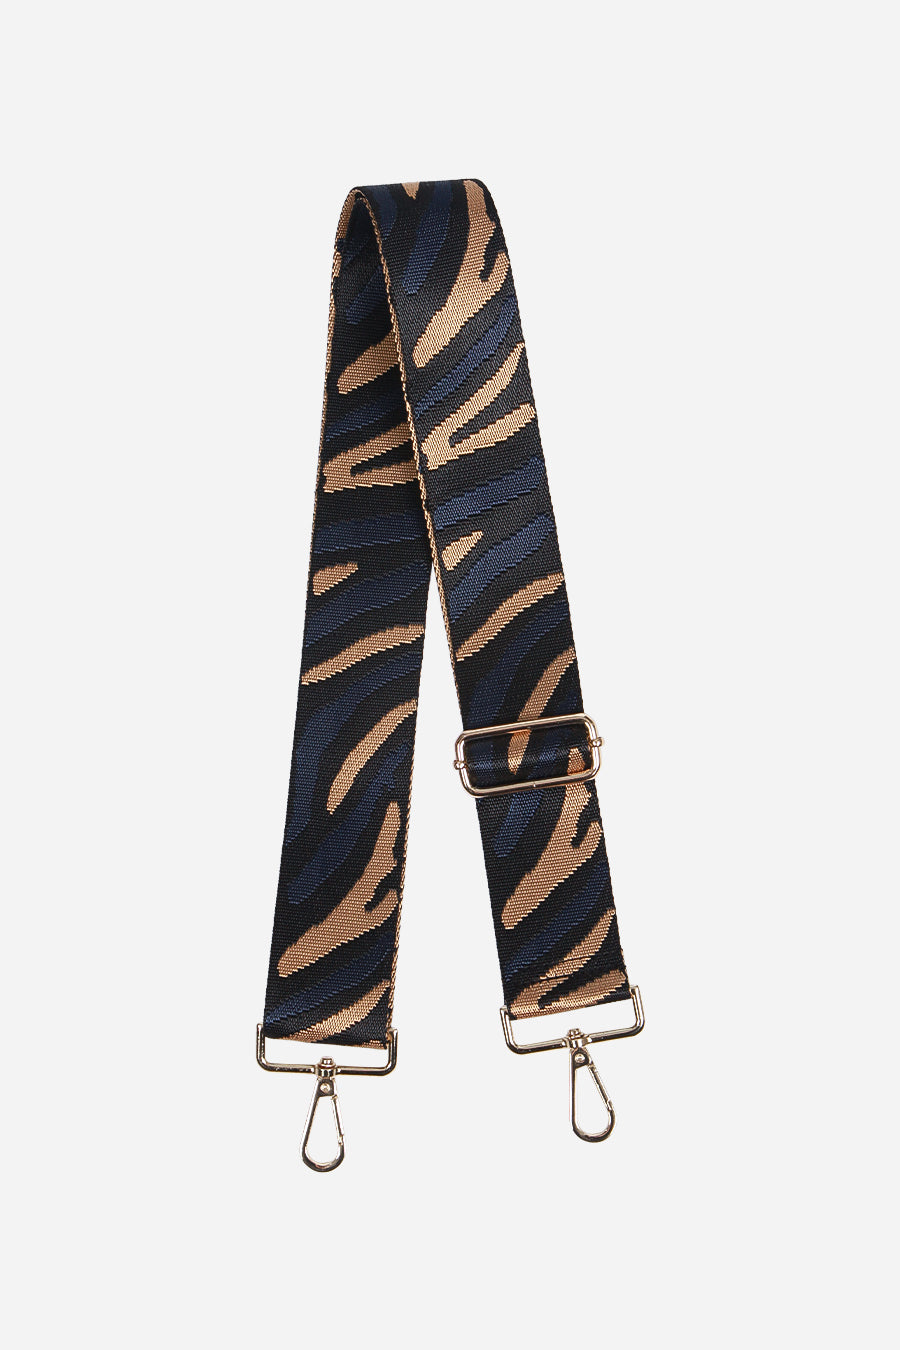 Two Tone Tiger Stripe Bag Strap - Navy Blue and Gold